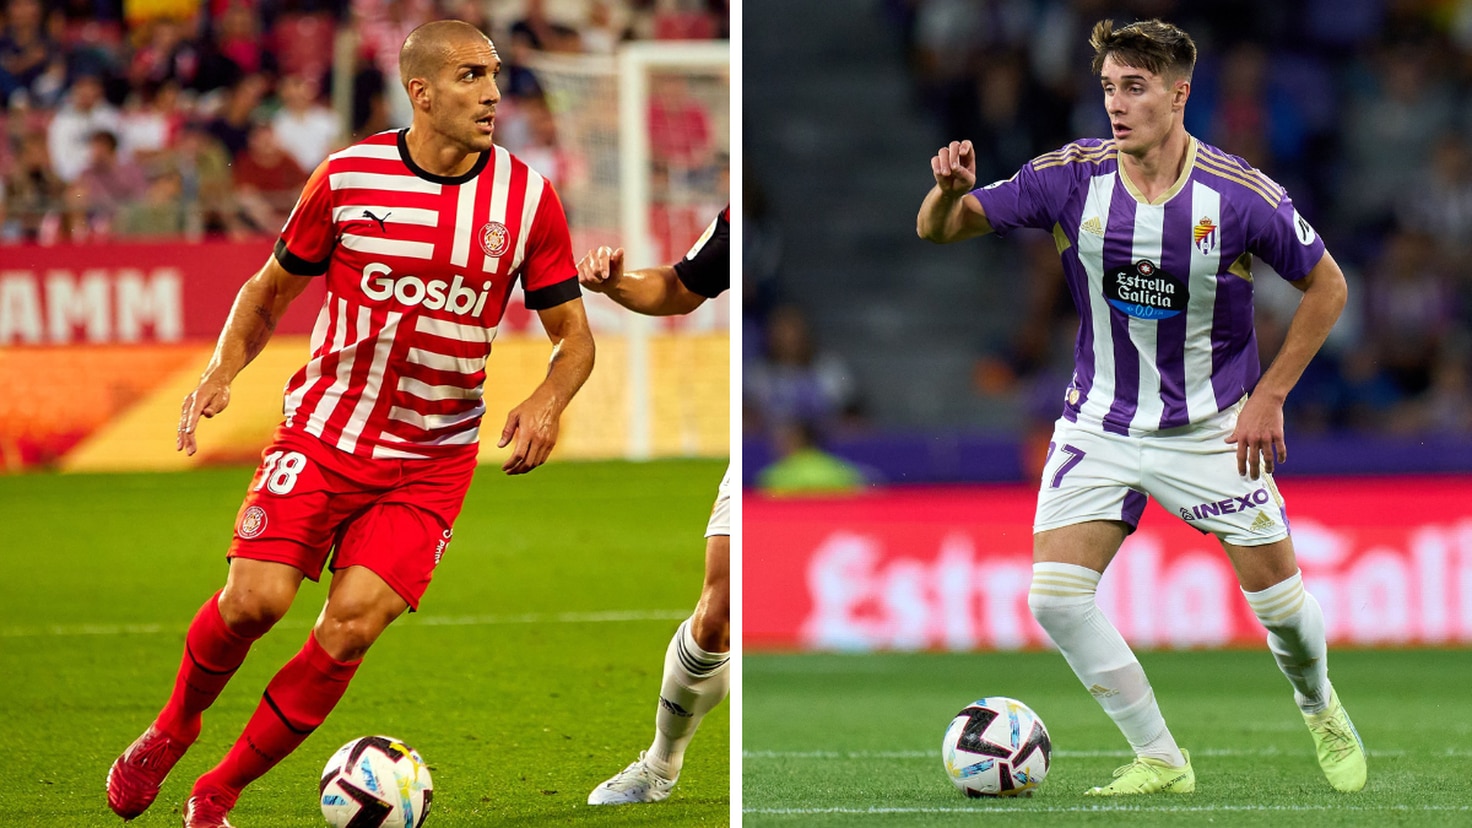 Fresneda and Romeu: options for a 'low cost' Barça
